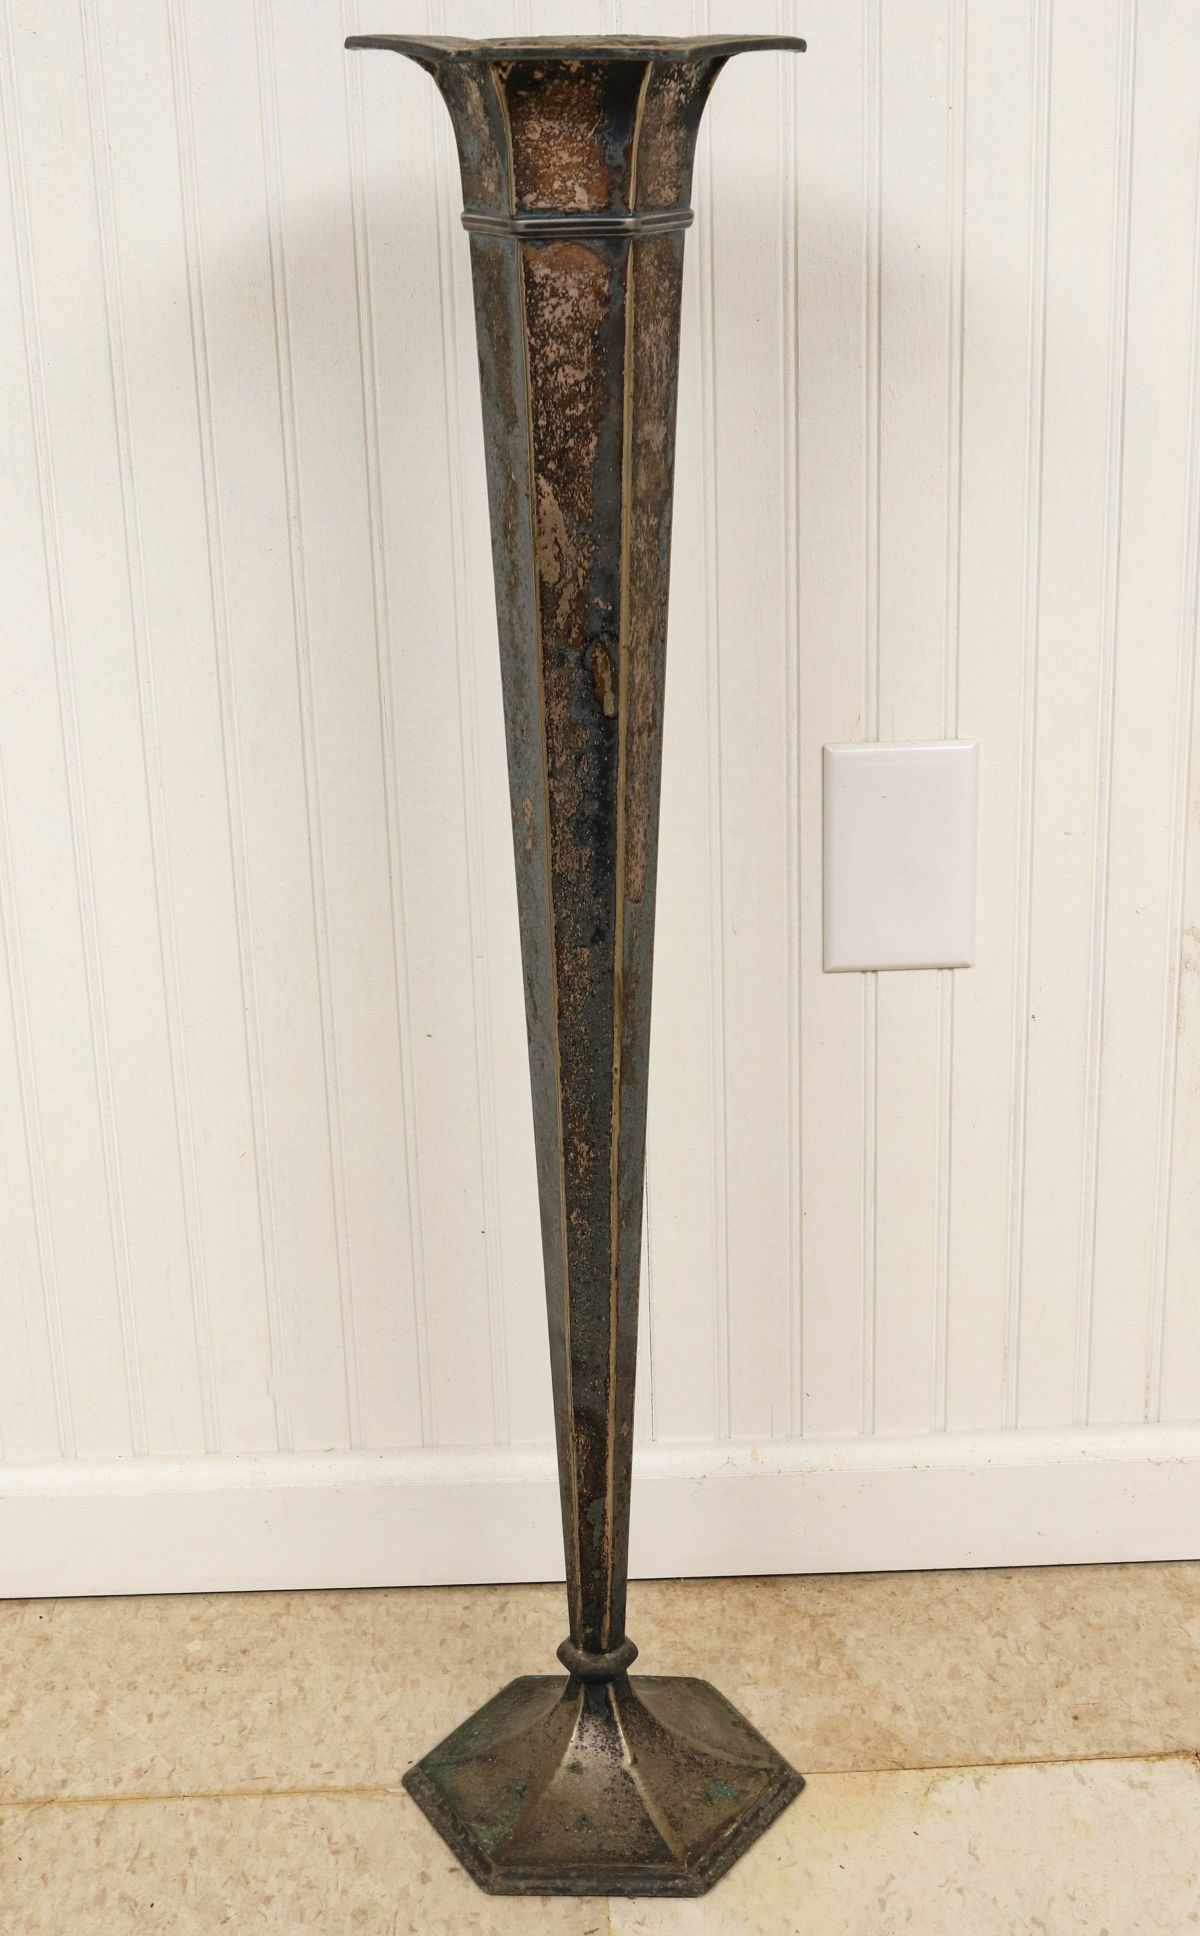 A 32.5-INCH EARLY 20TH CENT SILVER PLATED FLOOR VASE